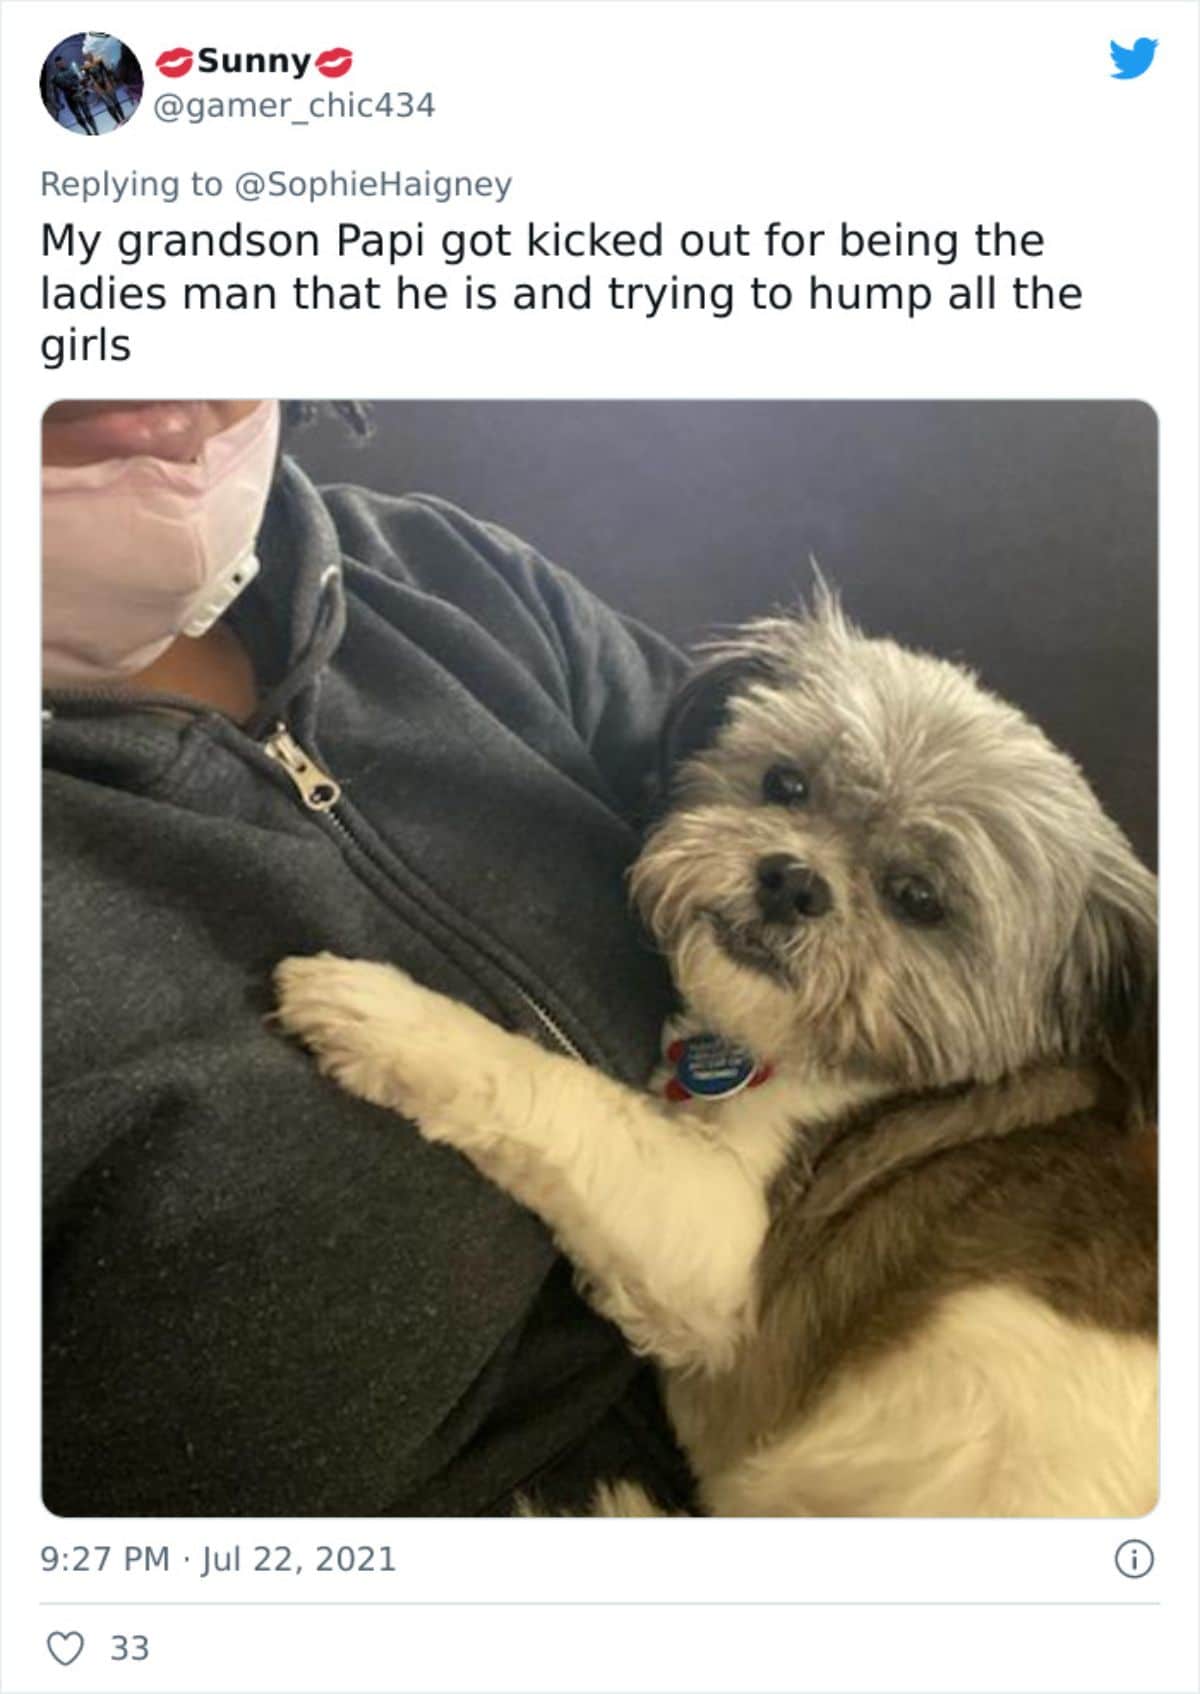 a tweet with a photo of a fluffy grey and white dog cuddled with a man saying he tried to hump the female dogs